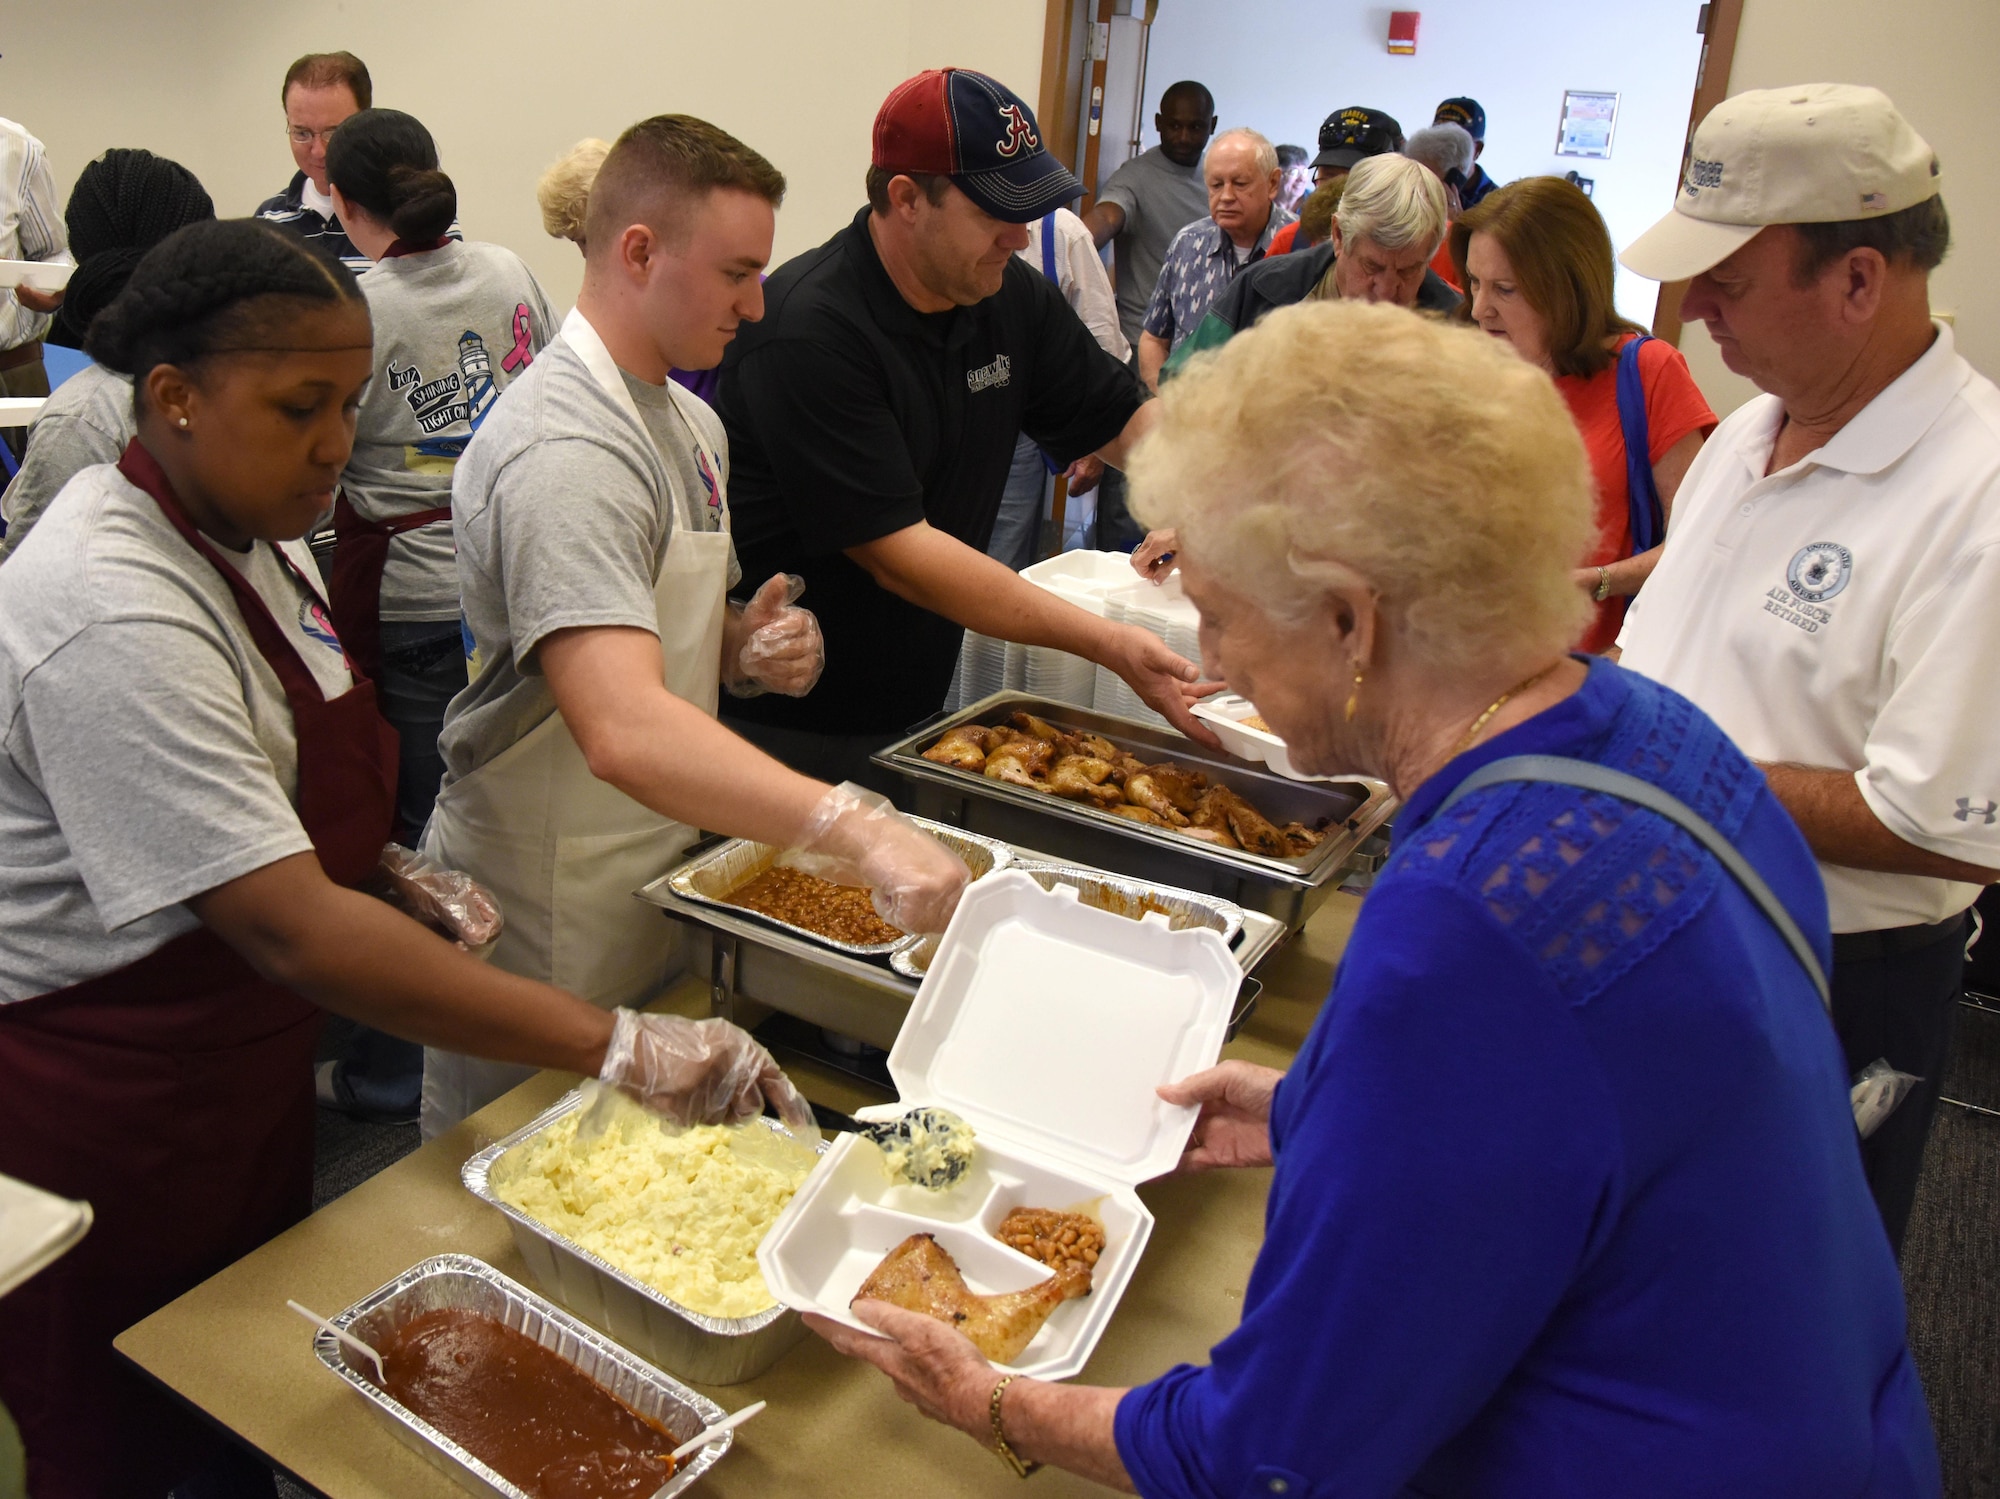 Keesler personnel serve lunch to military retirees during Retiree Appreciation Day at the Roberts Consolidated Aircraft Maintenance Facility Oct. 20, 2017, on Keesler Air Force Base, Mississippi. The annual event, sponsored by the Keesler Retiree Activities Office, included more than 20 displays with information pertinent to retirees and a free lunch. (U.S. Air Force photo by Kemberly Groue)